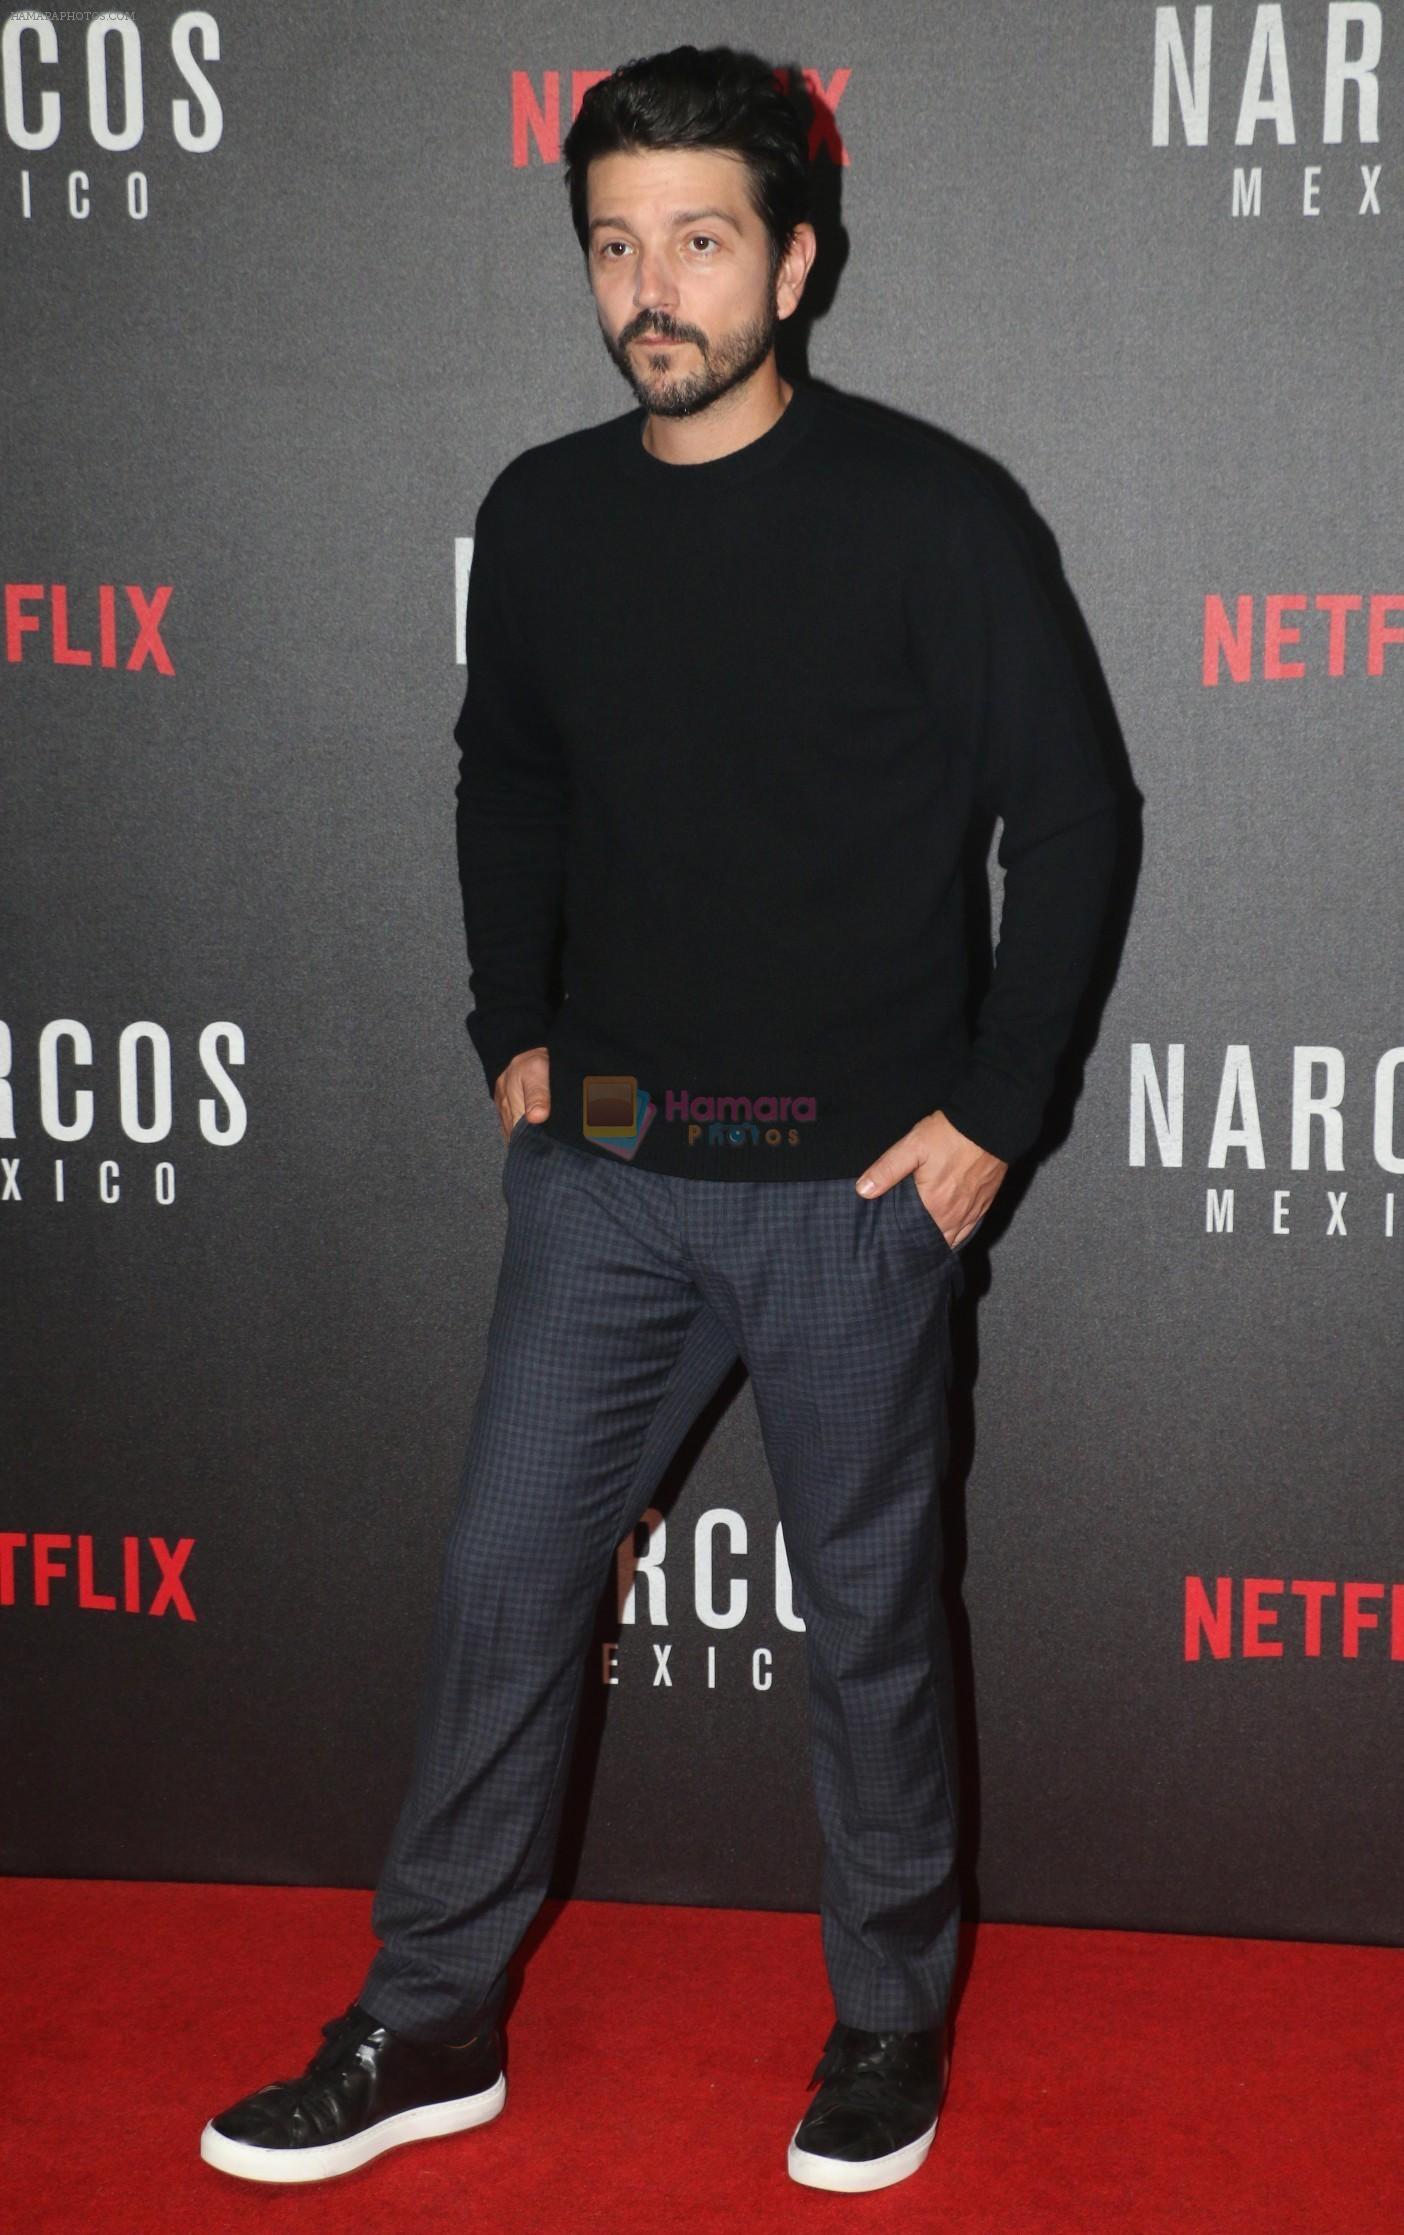 Diego Luna at the Screening Of Narcos Mexico on 13th Nov 2018